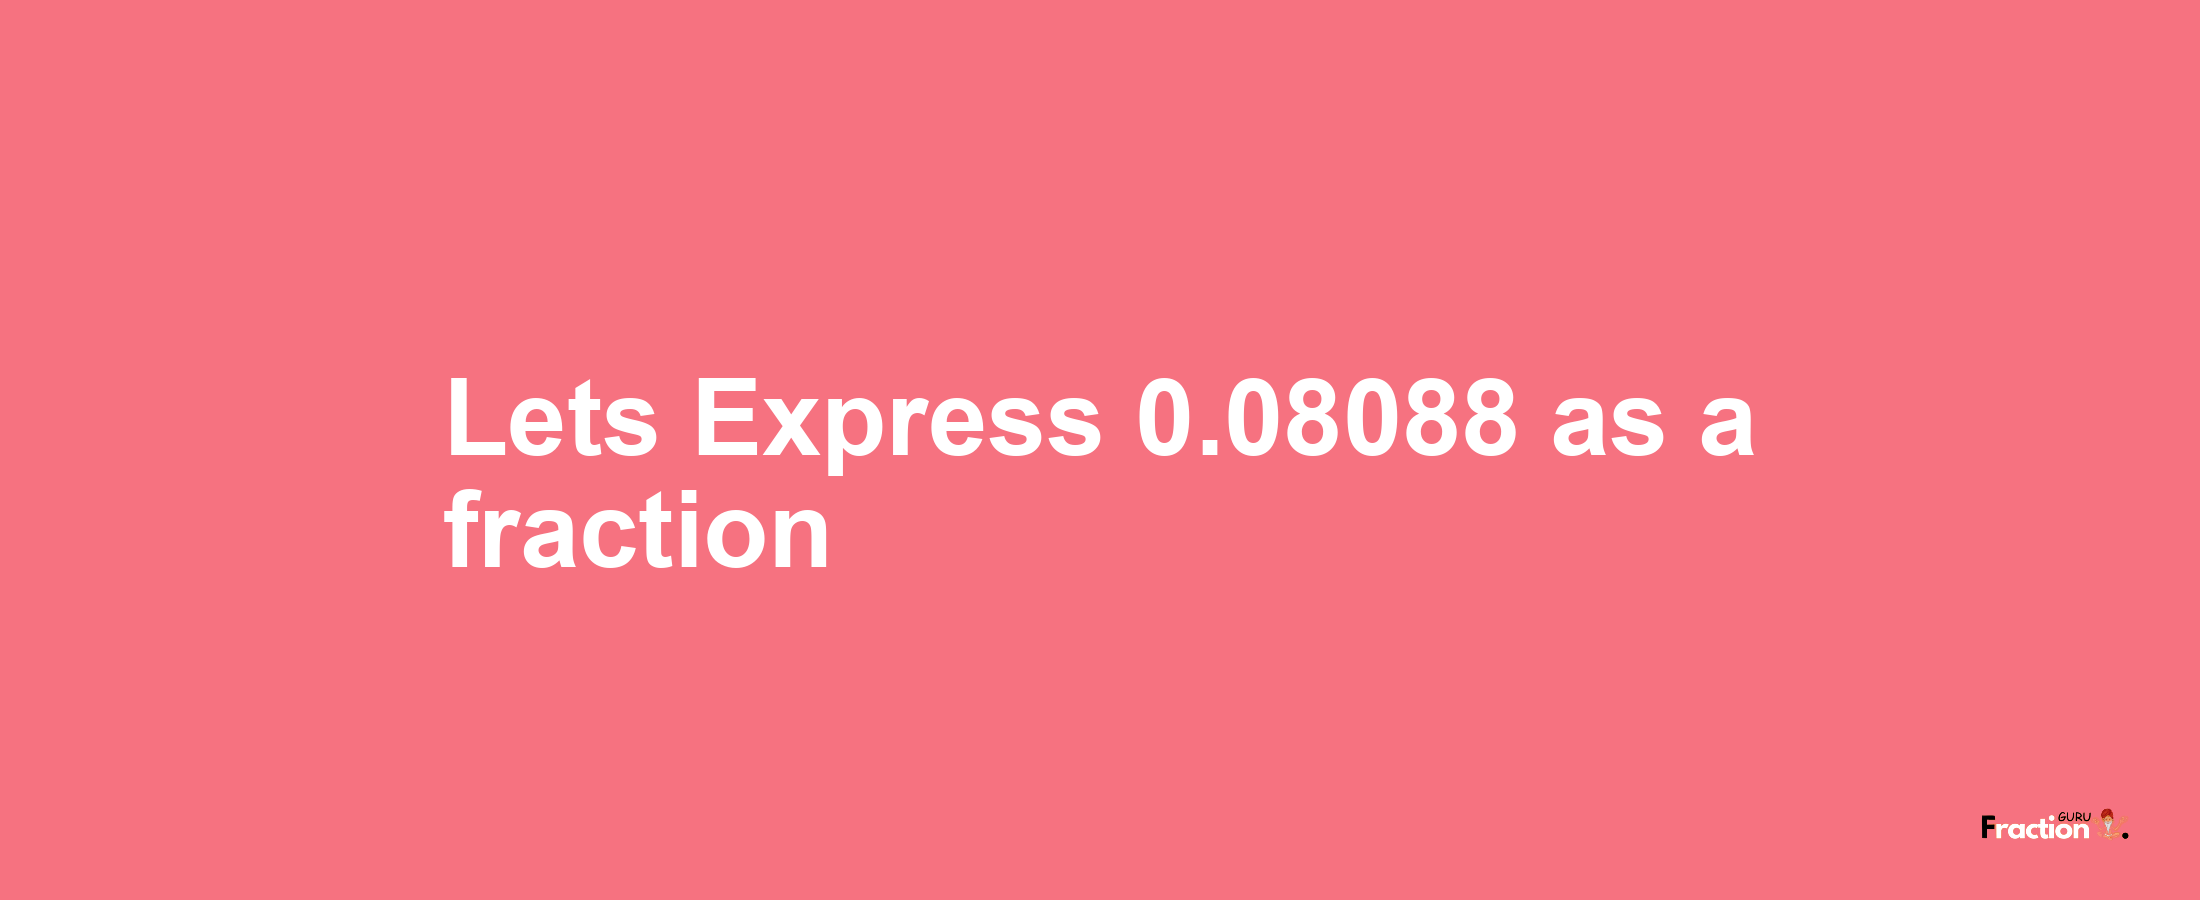 Lets Express 0.08088 as afraction